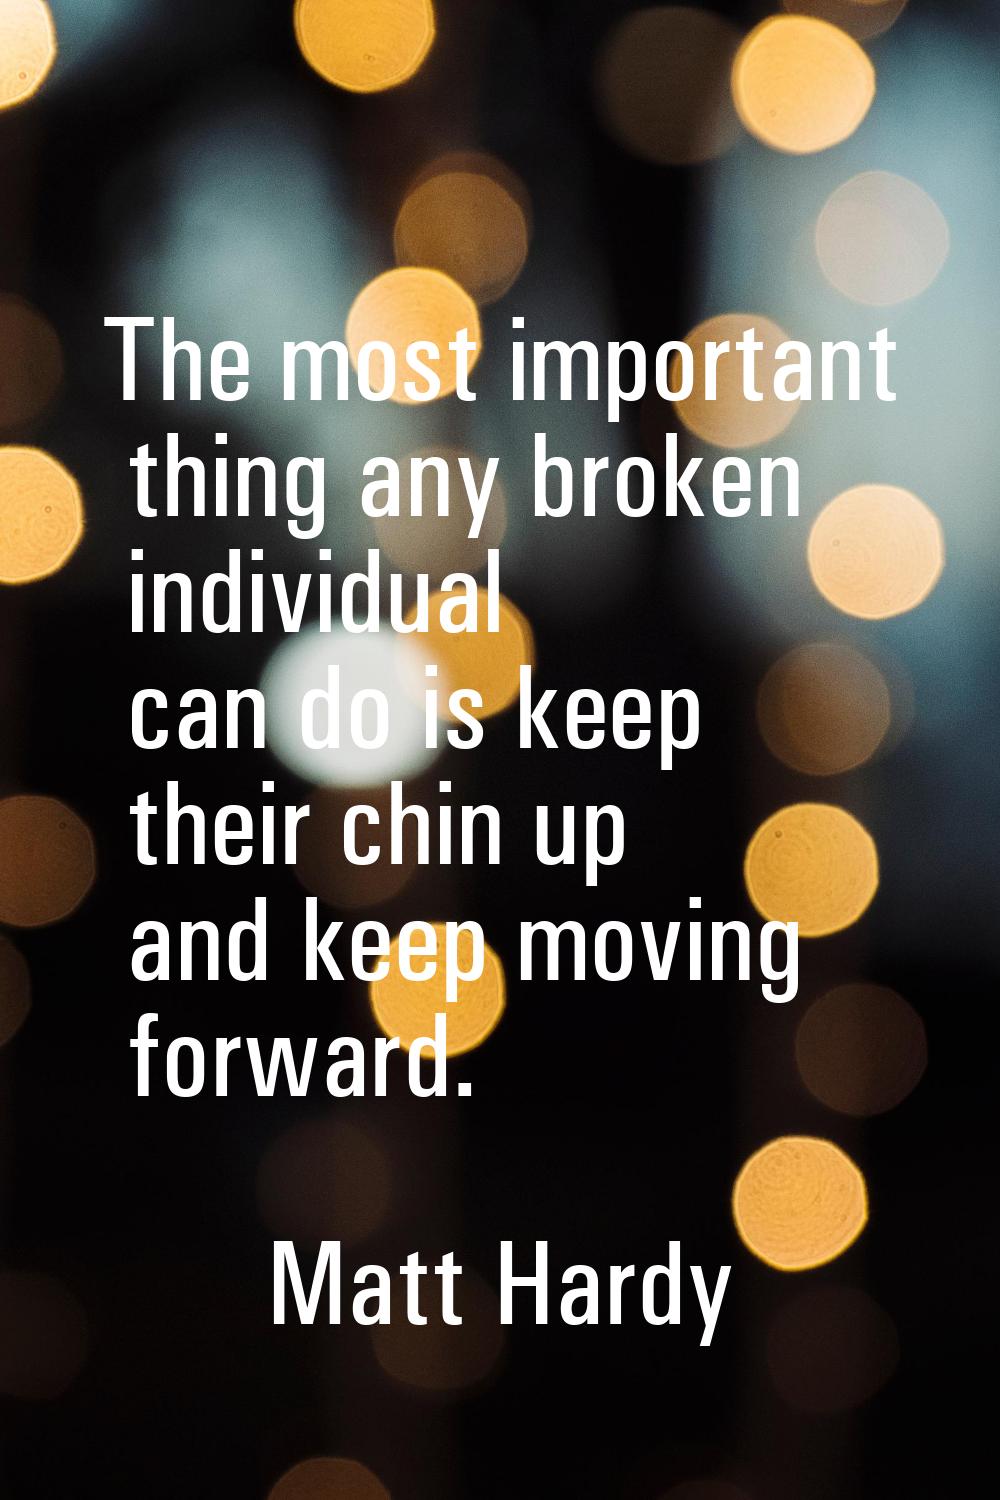 The most important thing any broken individual can do is keep their chin up and keep moving forward